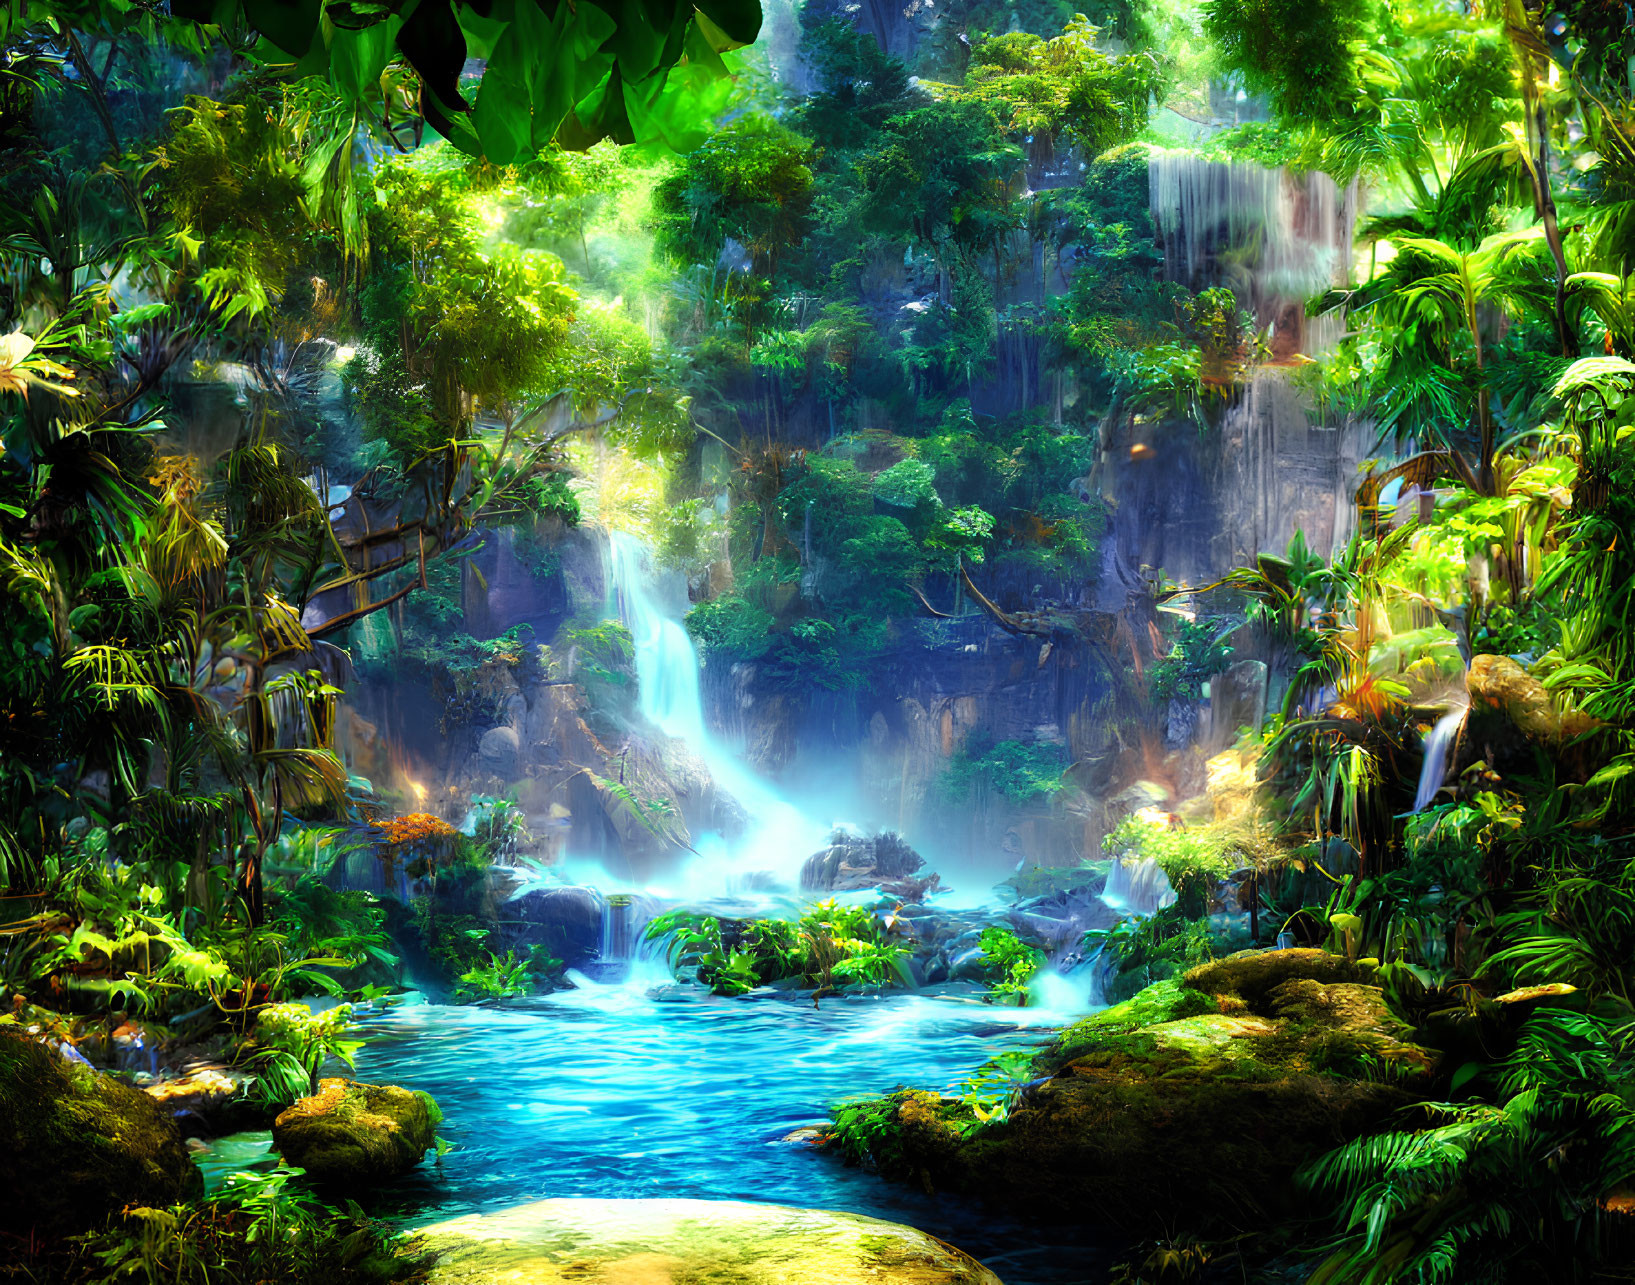 Vibrant tropical forest with waterfall and serene pool in sunlight